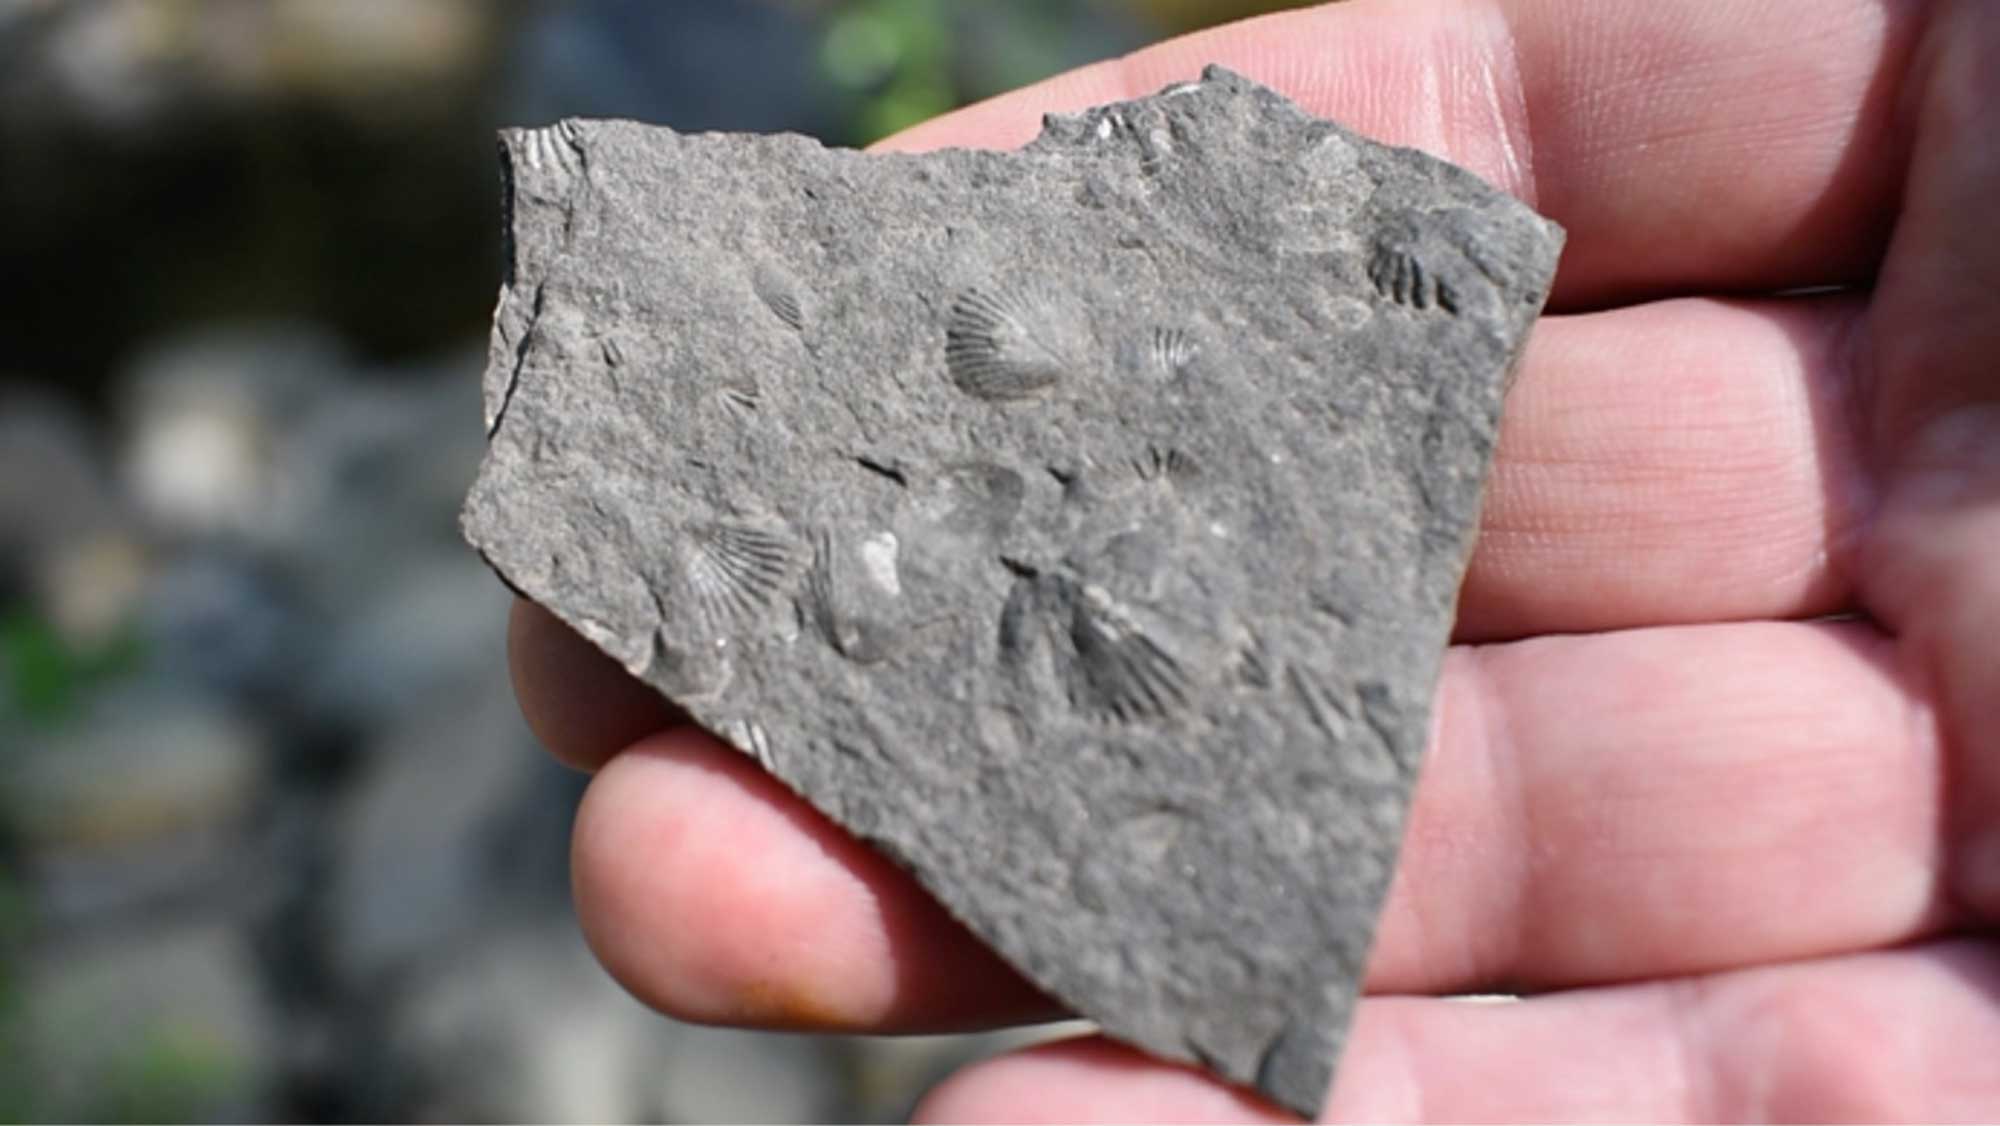 Photograph of a rock sample with brachiopod fossils.